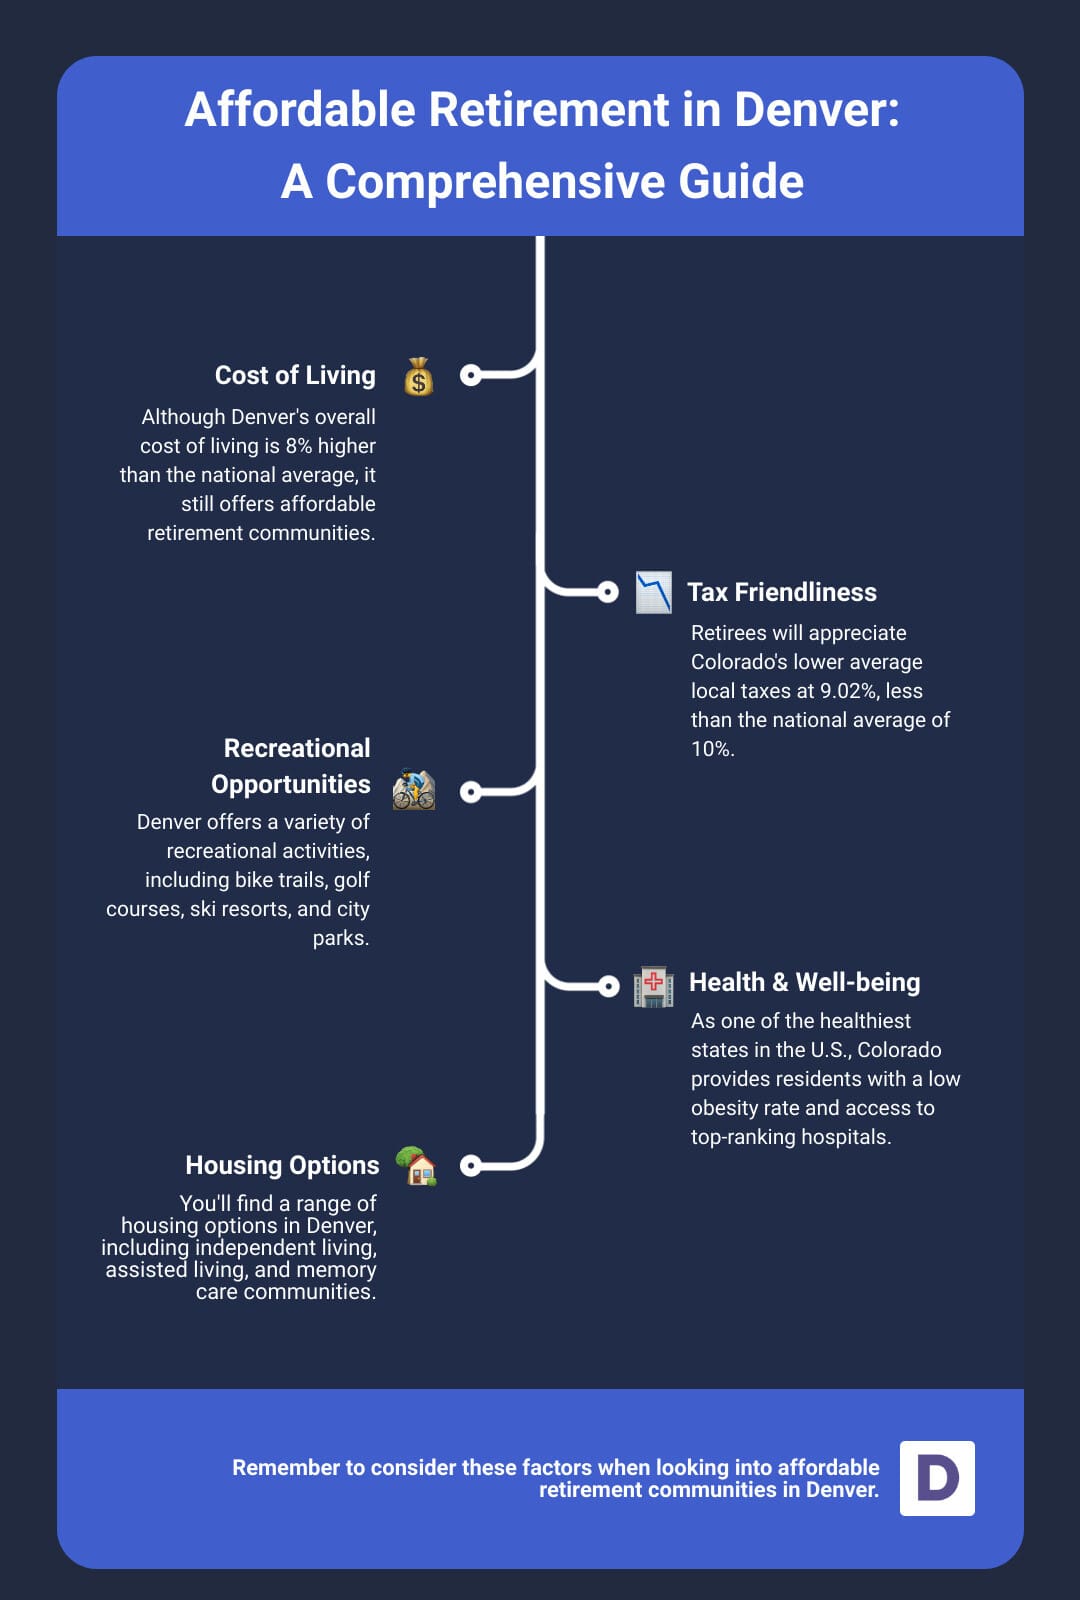 A detailed infographic showing the cost of living, housing options, lifestyle benefits, and health-care facilities in Denver infographic infographic